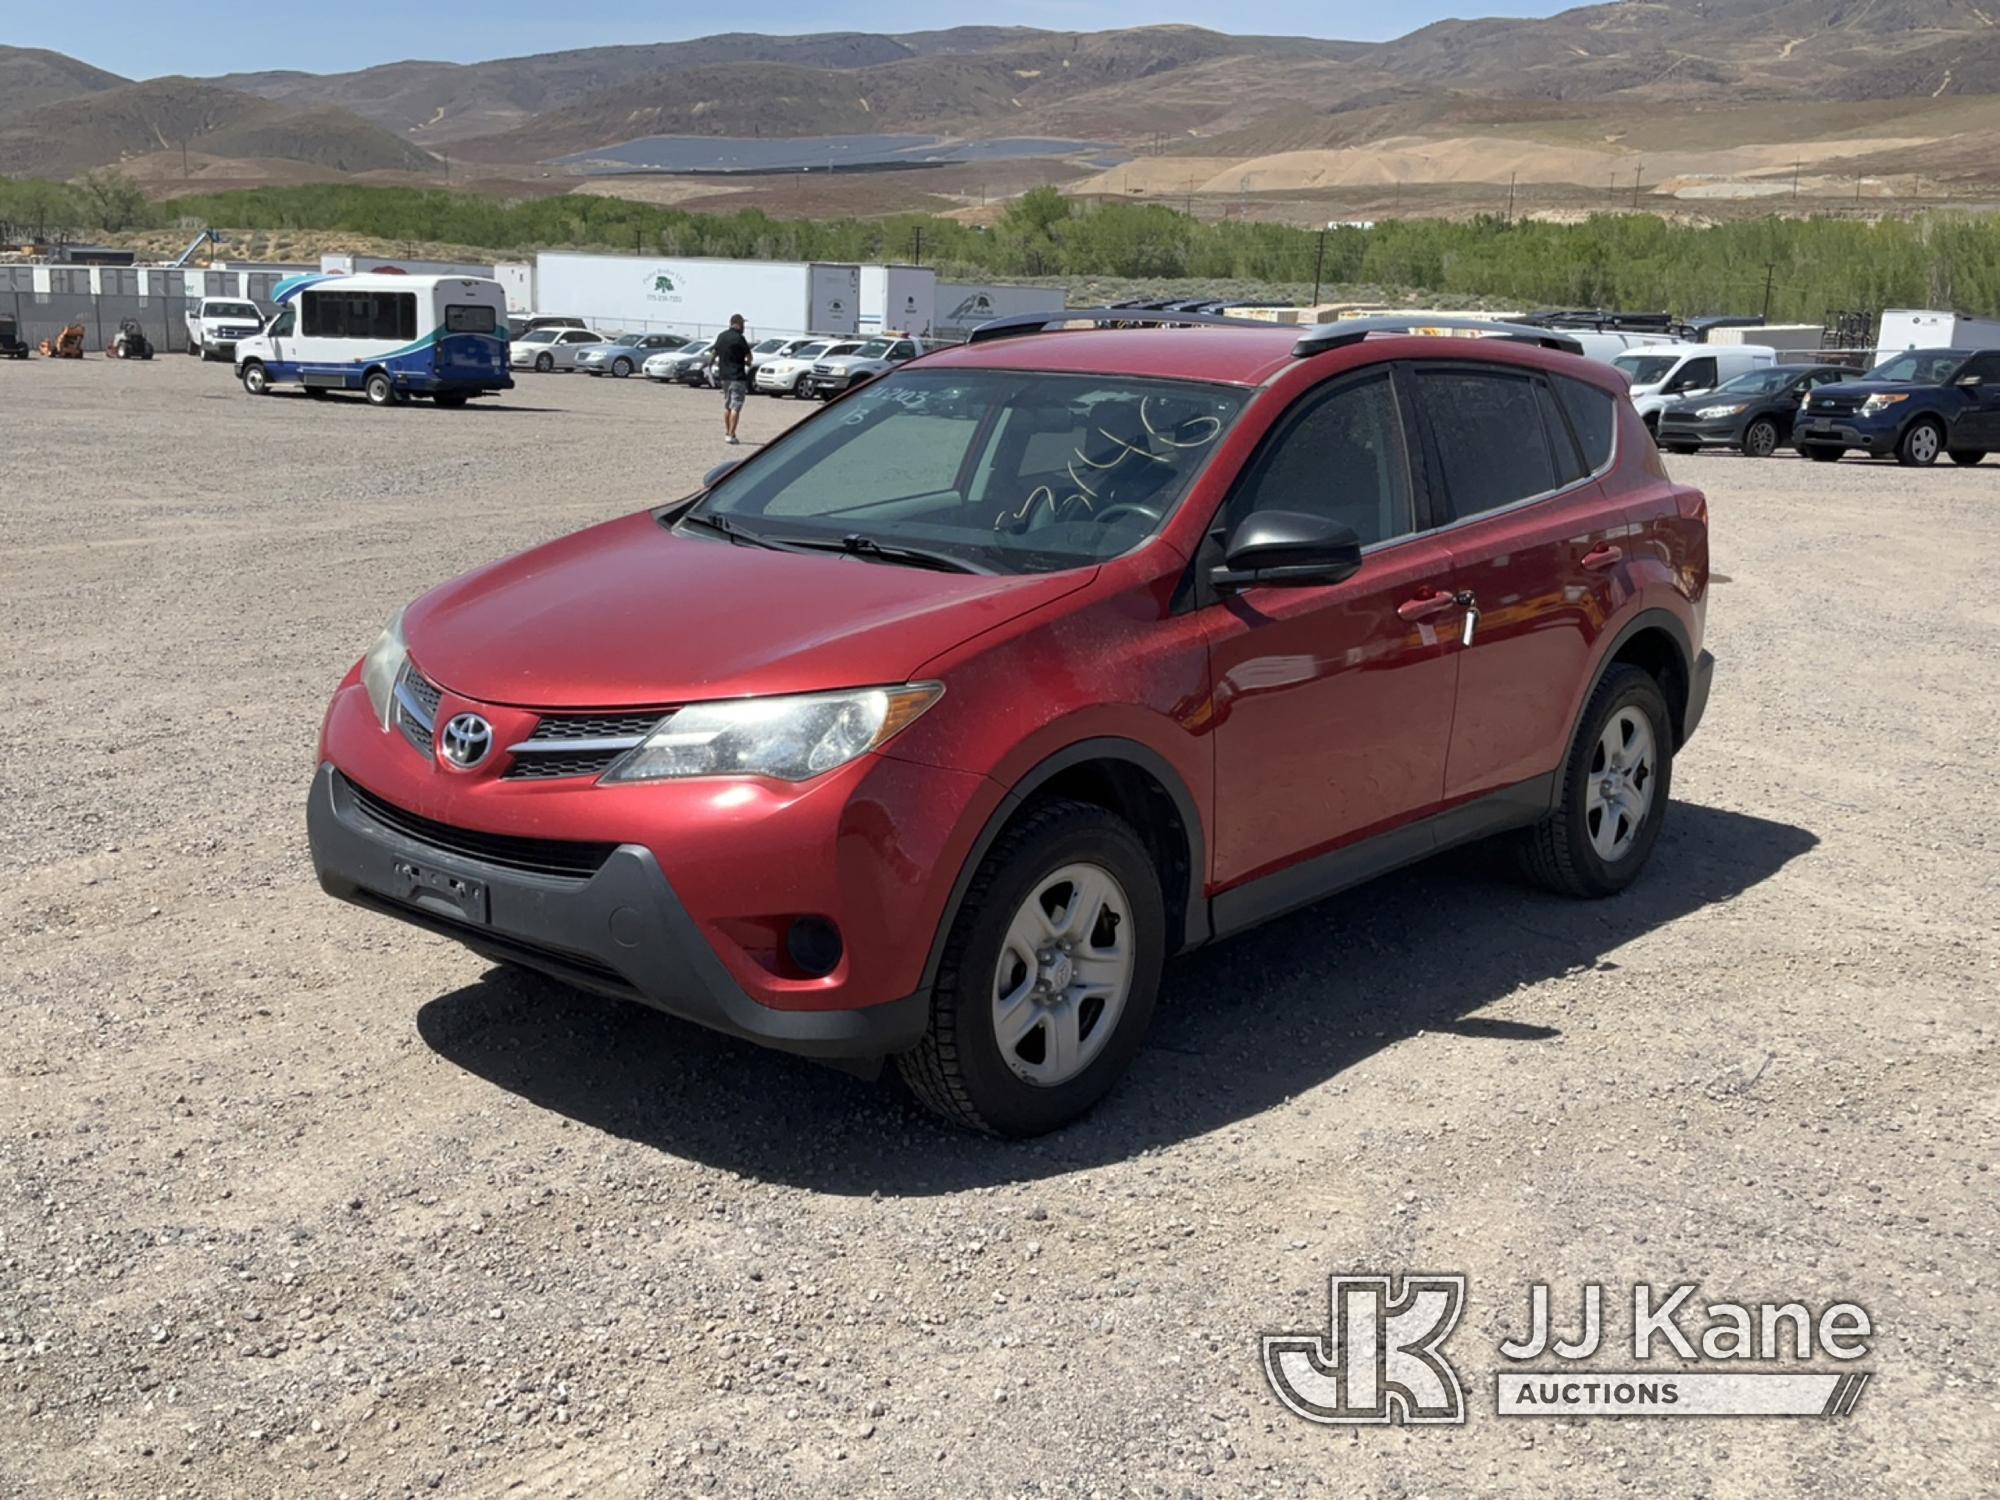 (McCarran, NV) 2013 Toyota RAV 4 Located In Reno Nv. Contact Nathan Tiedt To Preview 775-240-1030 Ru